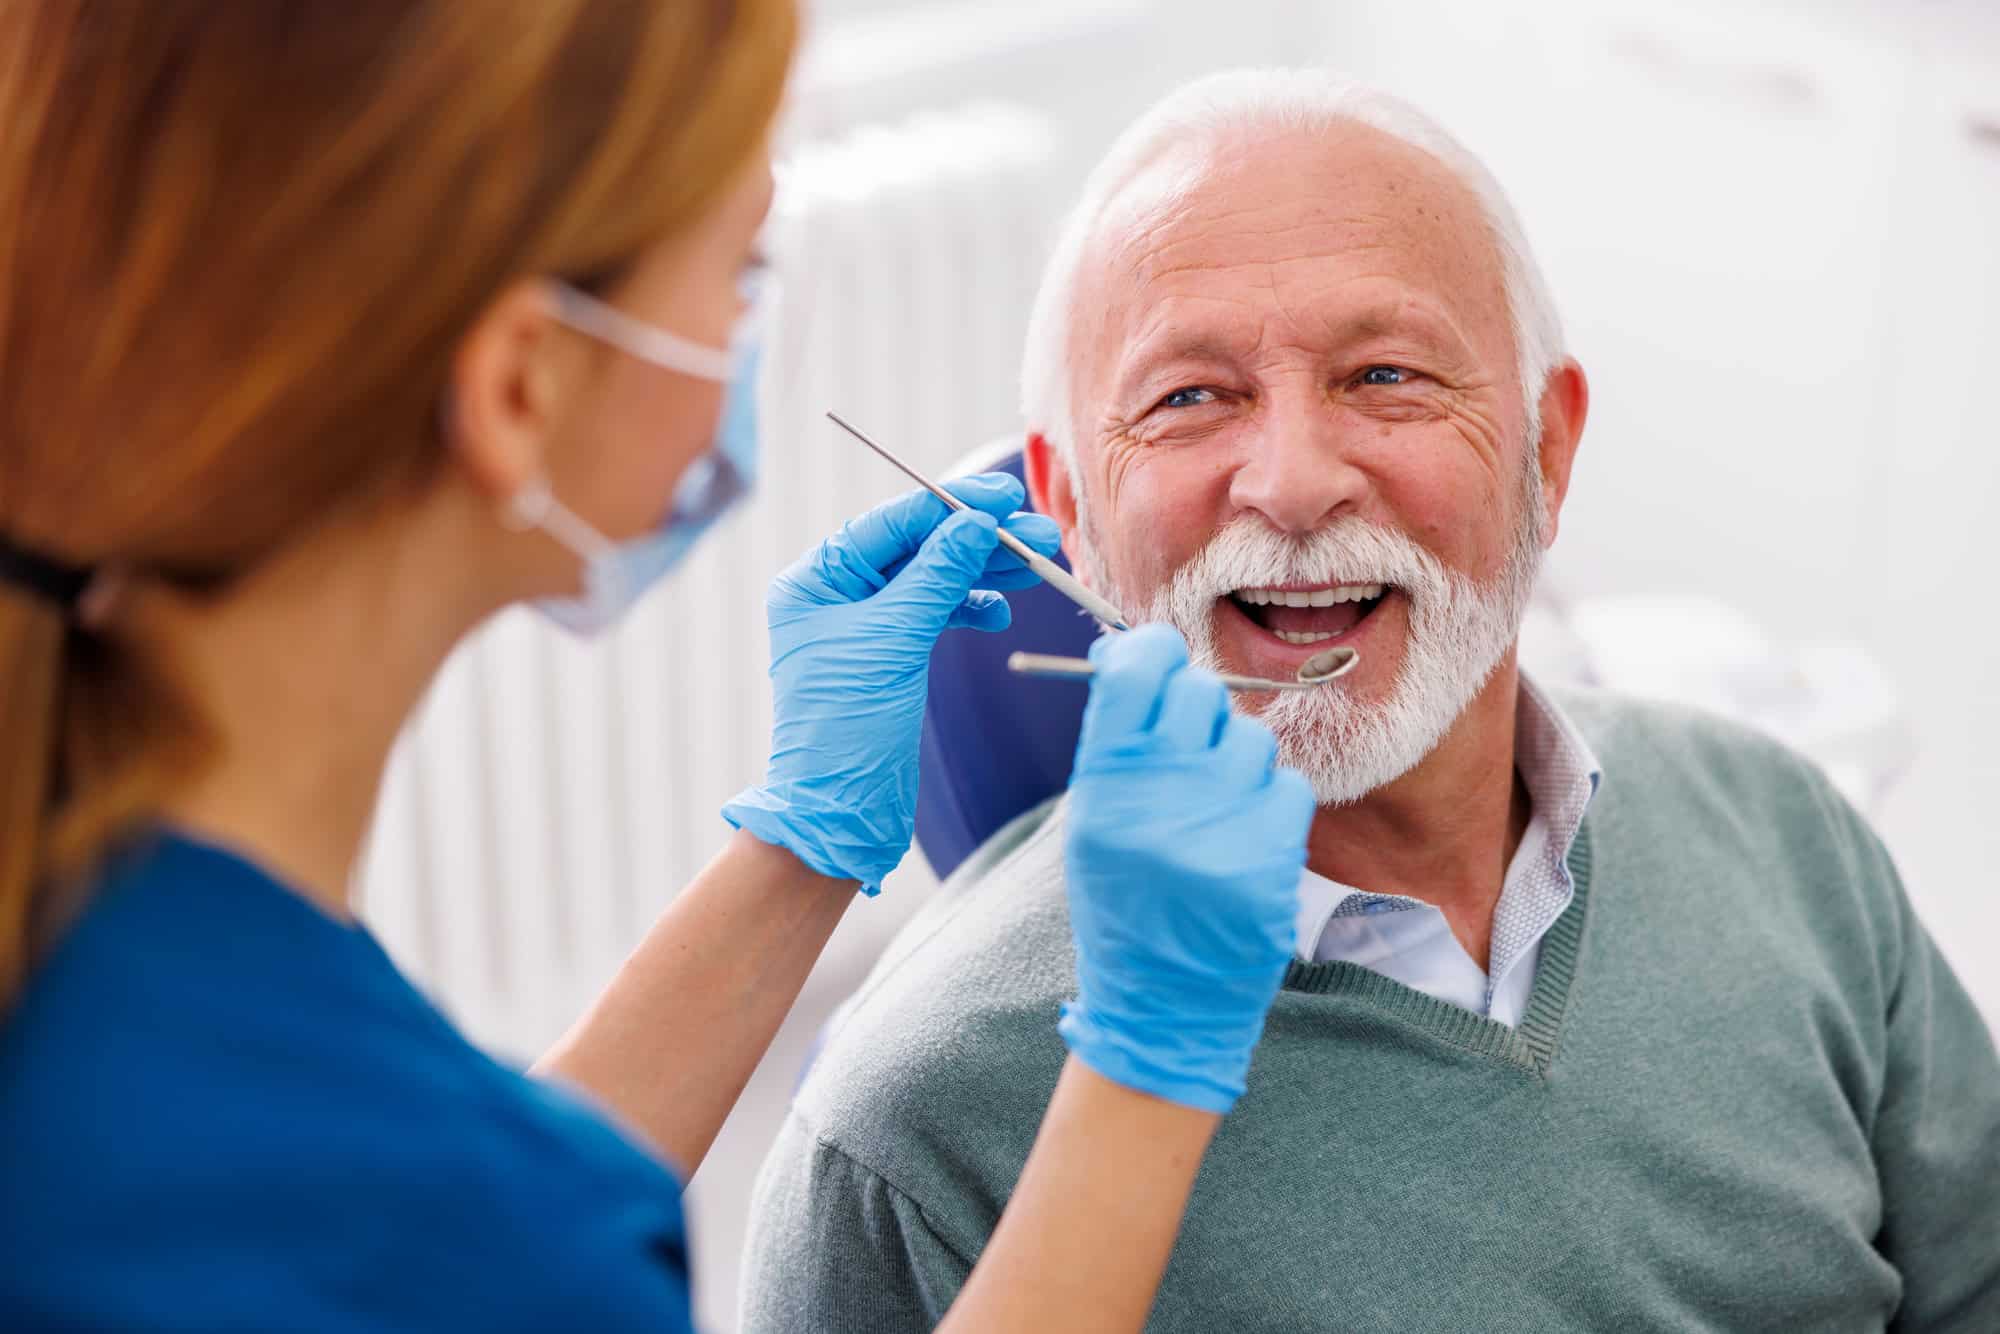 older man smiling getting teeth checked by dental assistant holding metal tools